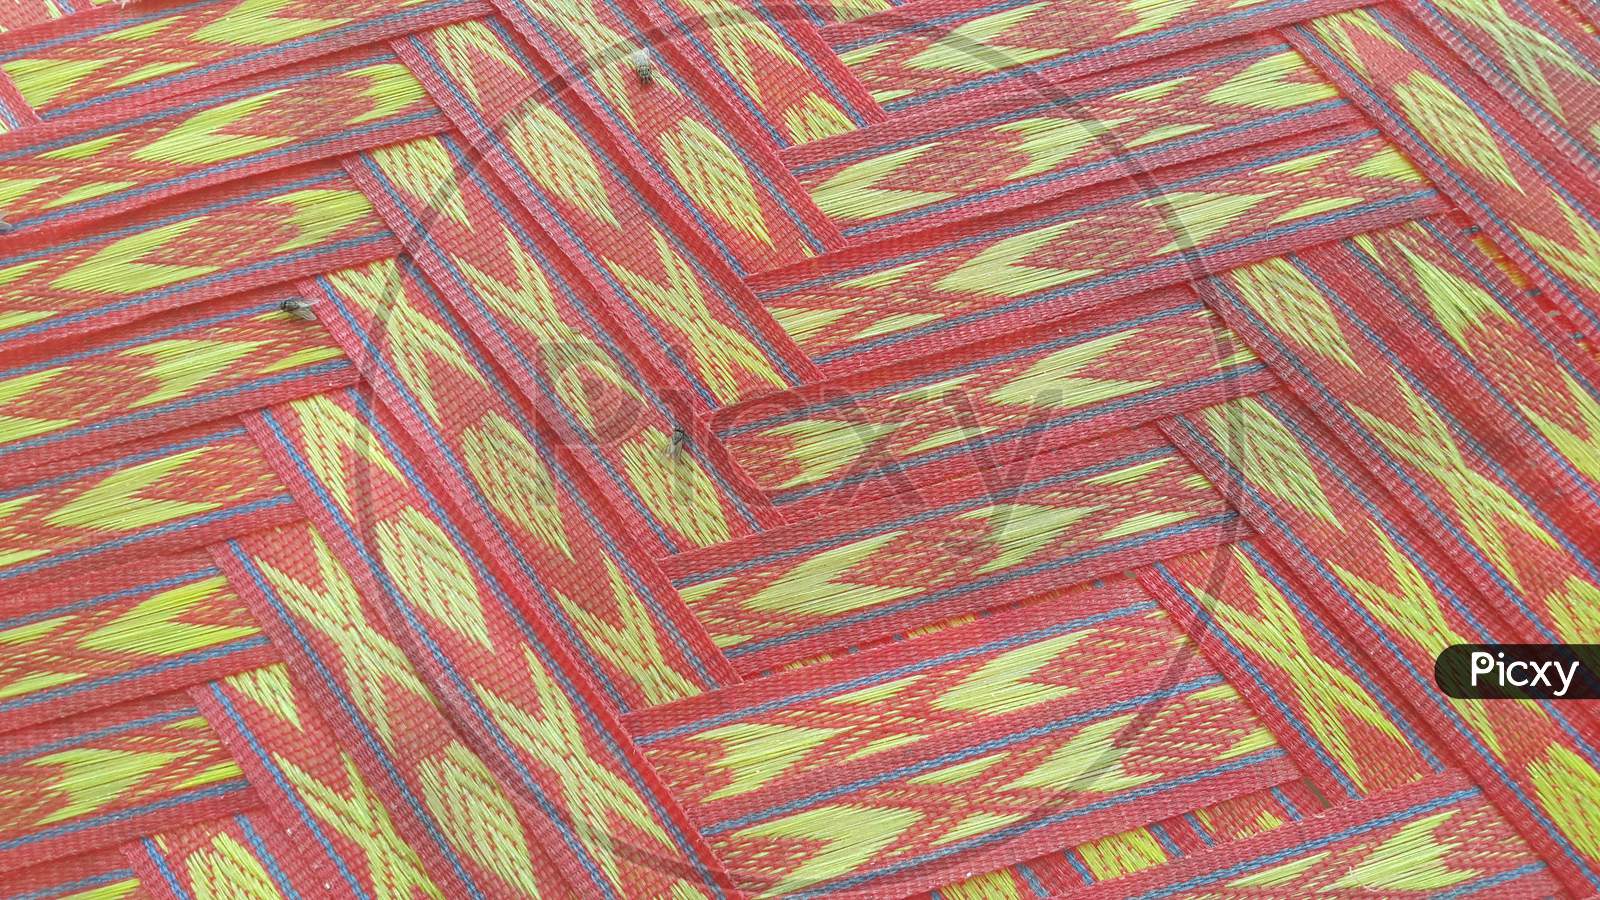 Closeup View Of Colorful Plastic Woven Stripes.